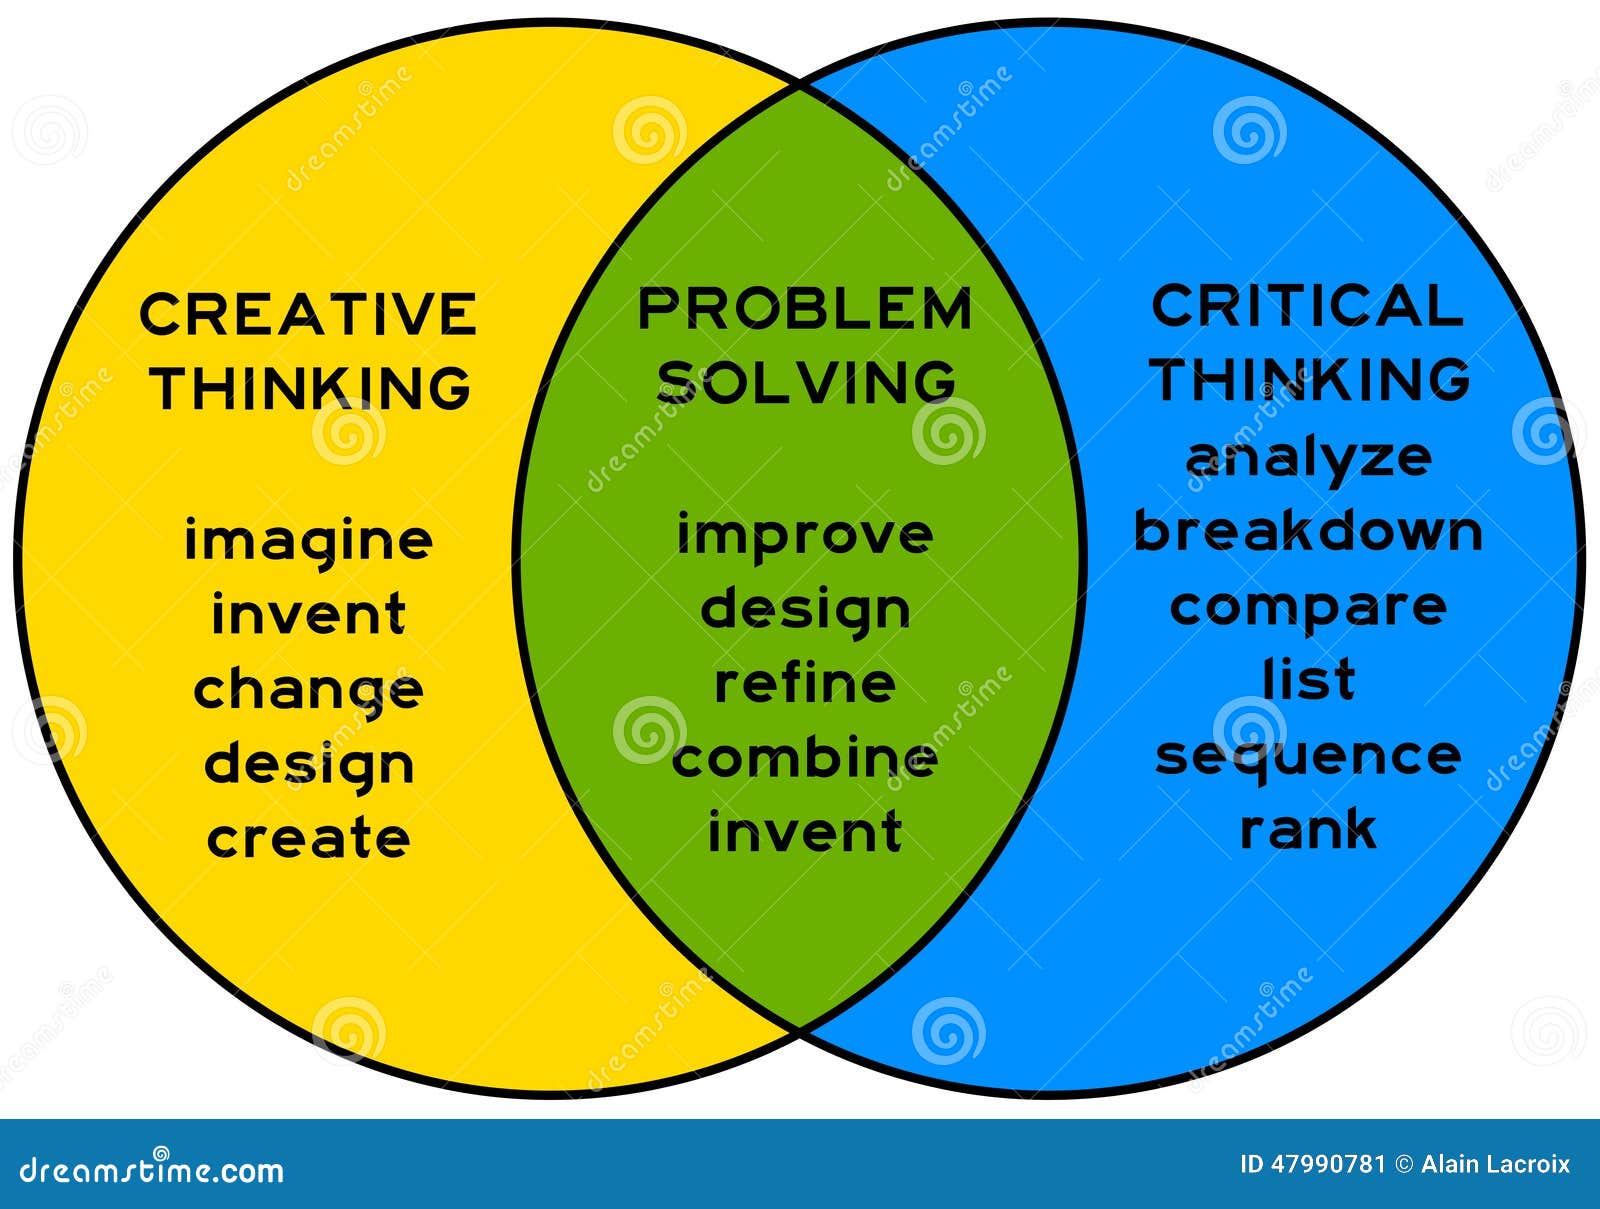 creative problem solving thinking skills for a changing world